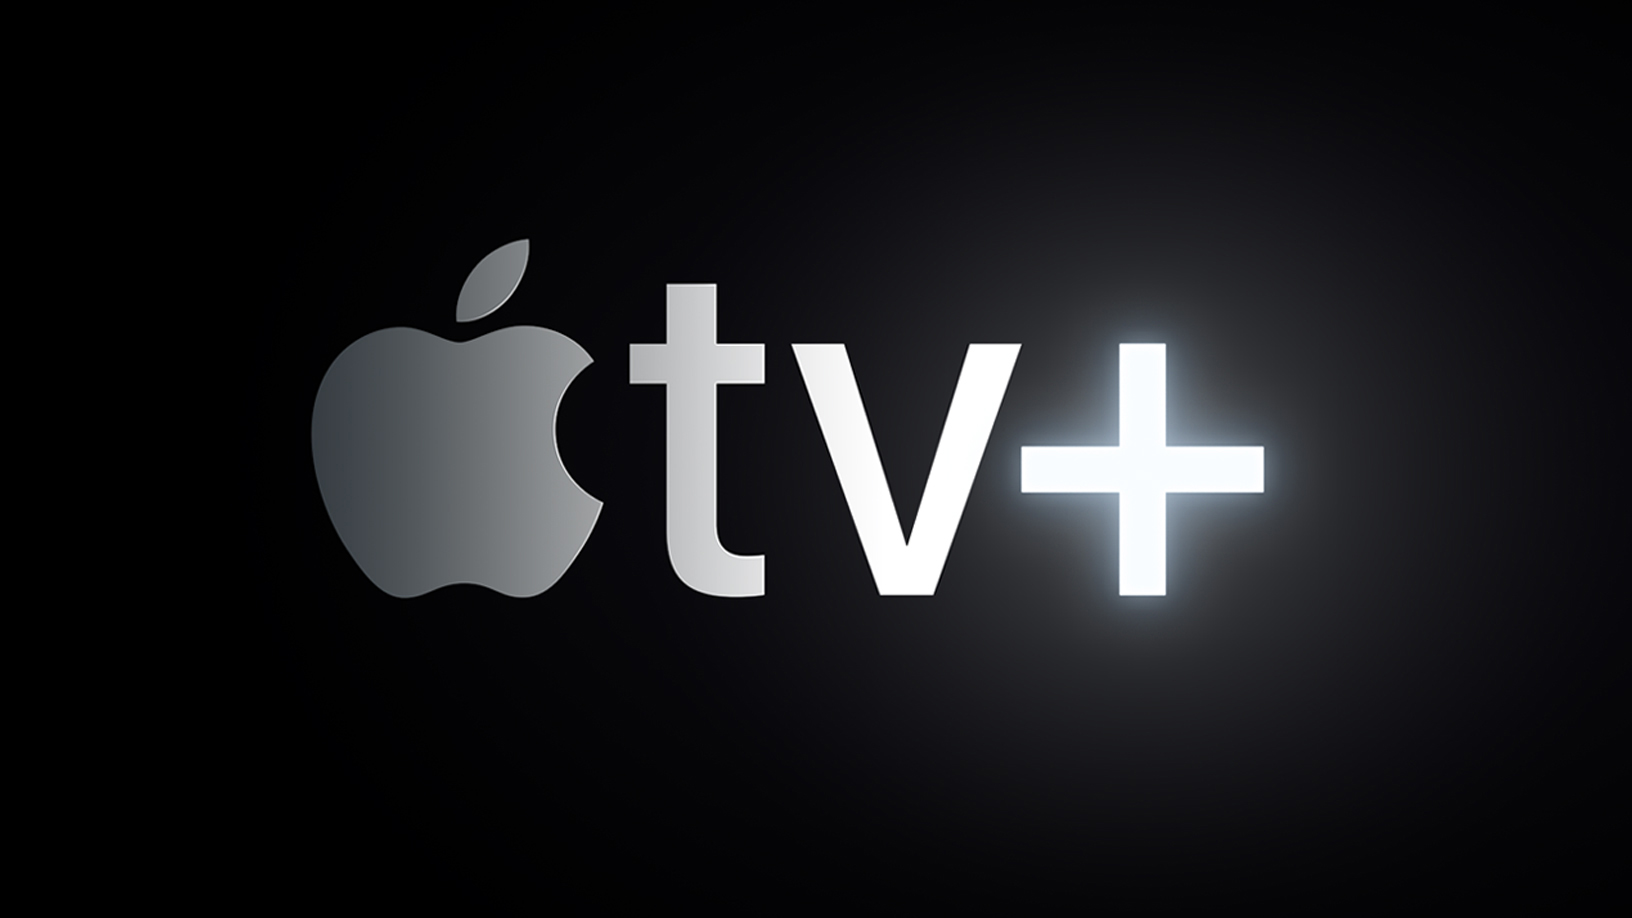 Apple TV+ may be bundled with Apple Music